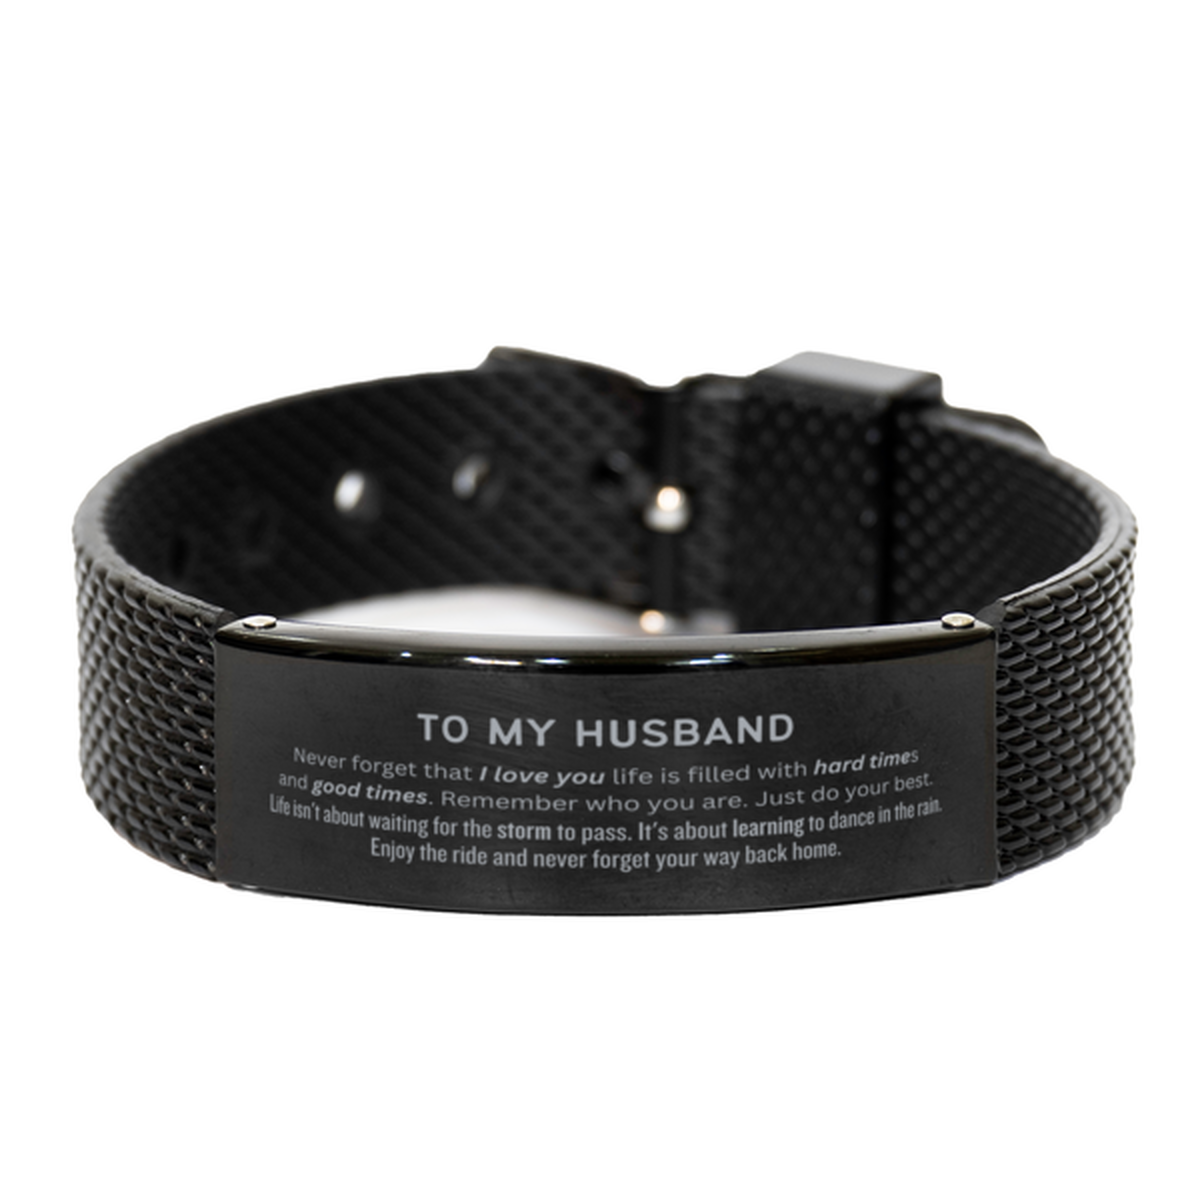 Christmas Husband Black Shark Mesh Bracelet Gifts, To My Husband Birthday Thank You Gifts For Husband, Graduation Unique Gifts For Husband To My Husband Never forget that I love you life is filled with hard times and good times. Remember who you are. Just